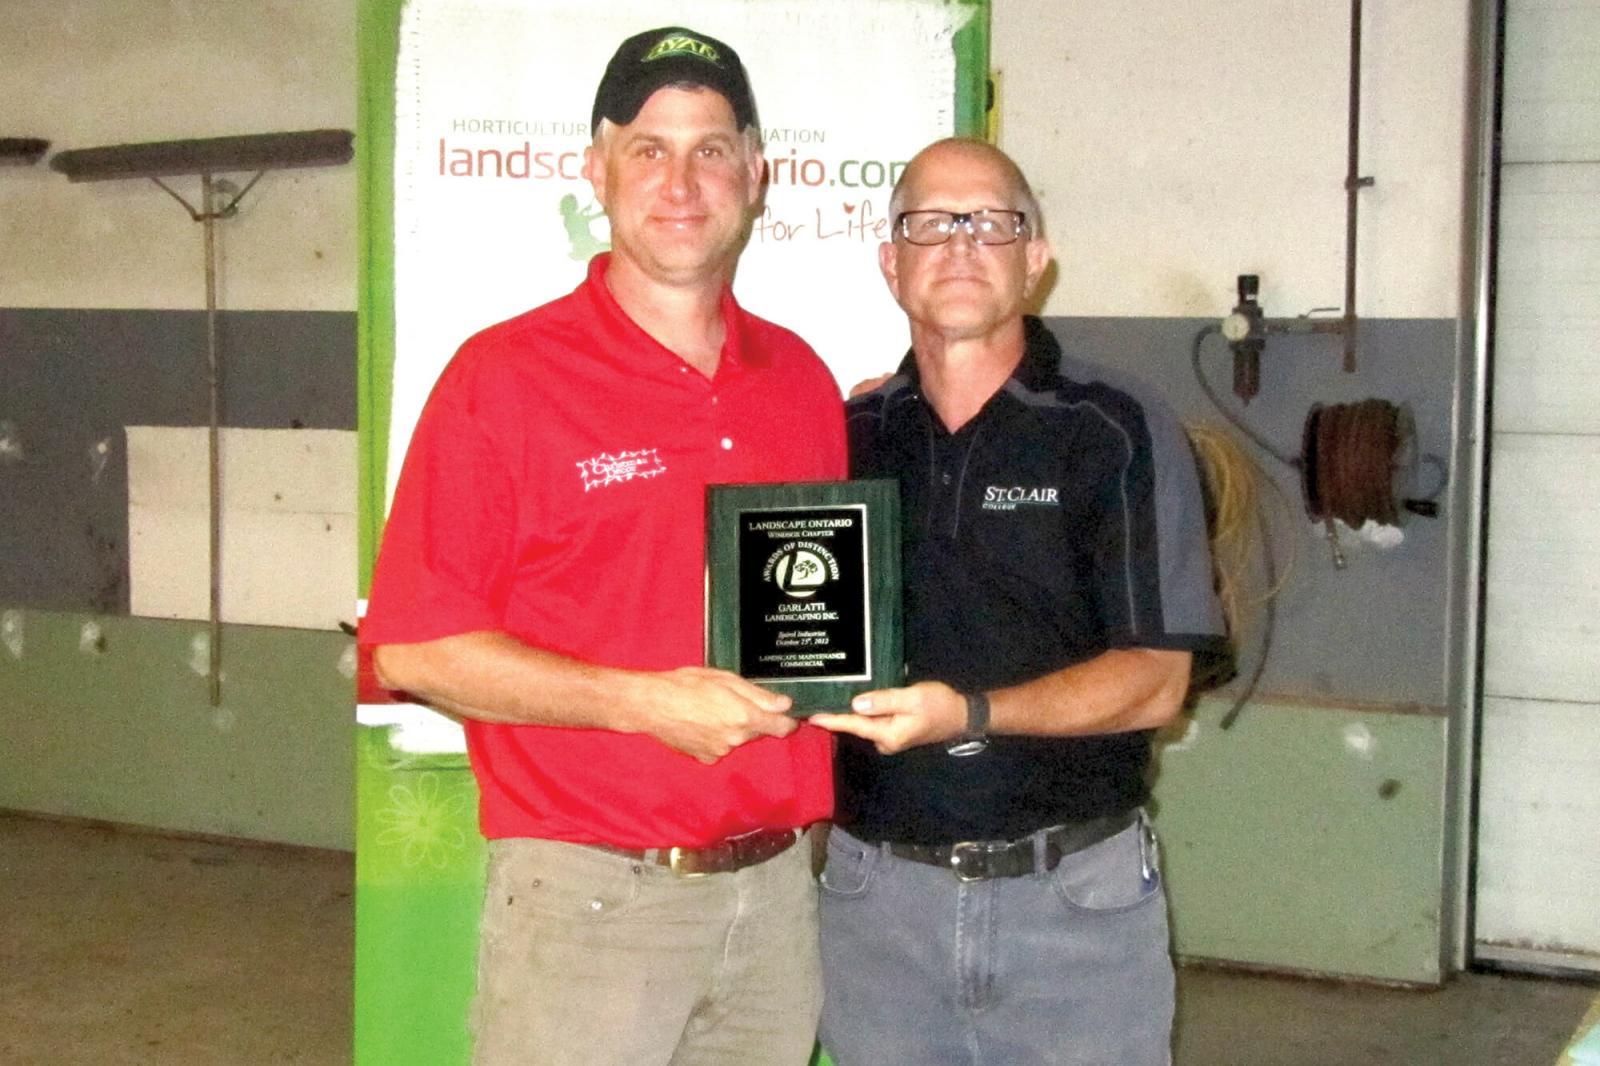 Dan Garlatti, left, of Garlatti Landscaping in LaSalle receives one of his 2012 Awards of Distinction from Chapter director Jay Terryberry at the 2012 Awards of Distinction.